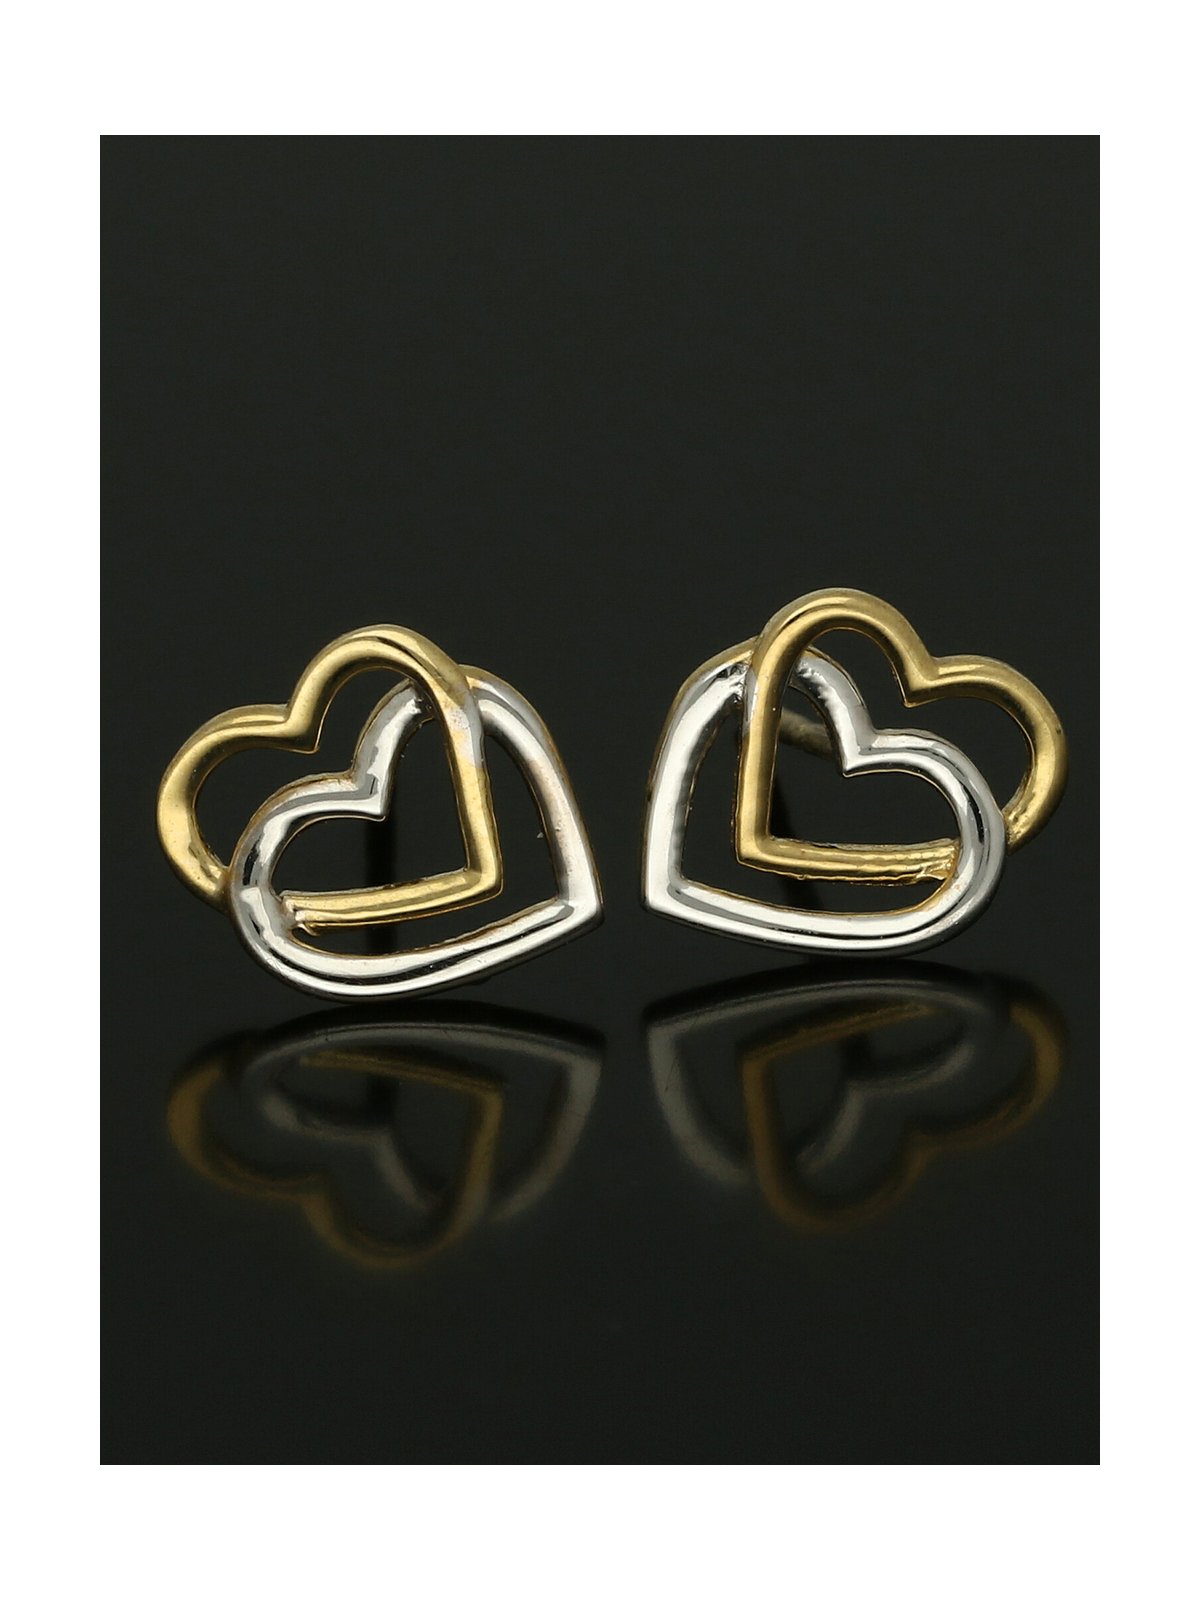 Double Heart Stud Earrings 9mm in 9ct Yellow & White Gold